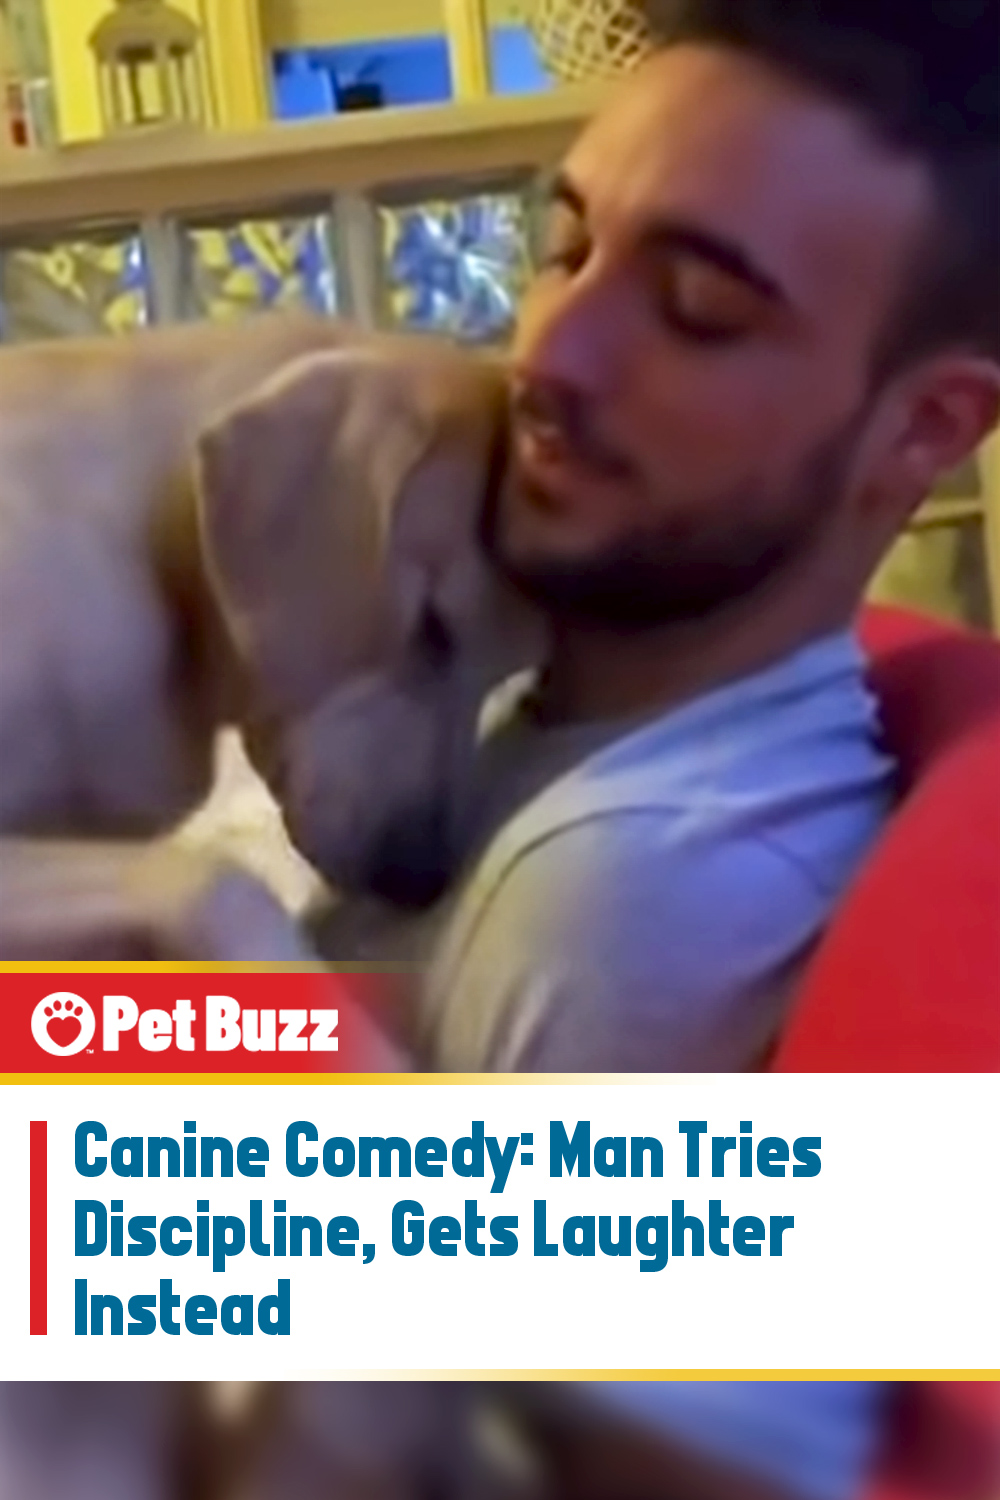 Canine Comedy: Man Tries Discipline, Gets Laughter Instead